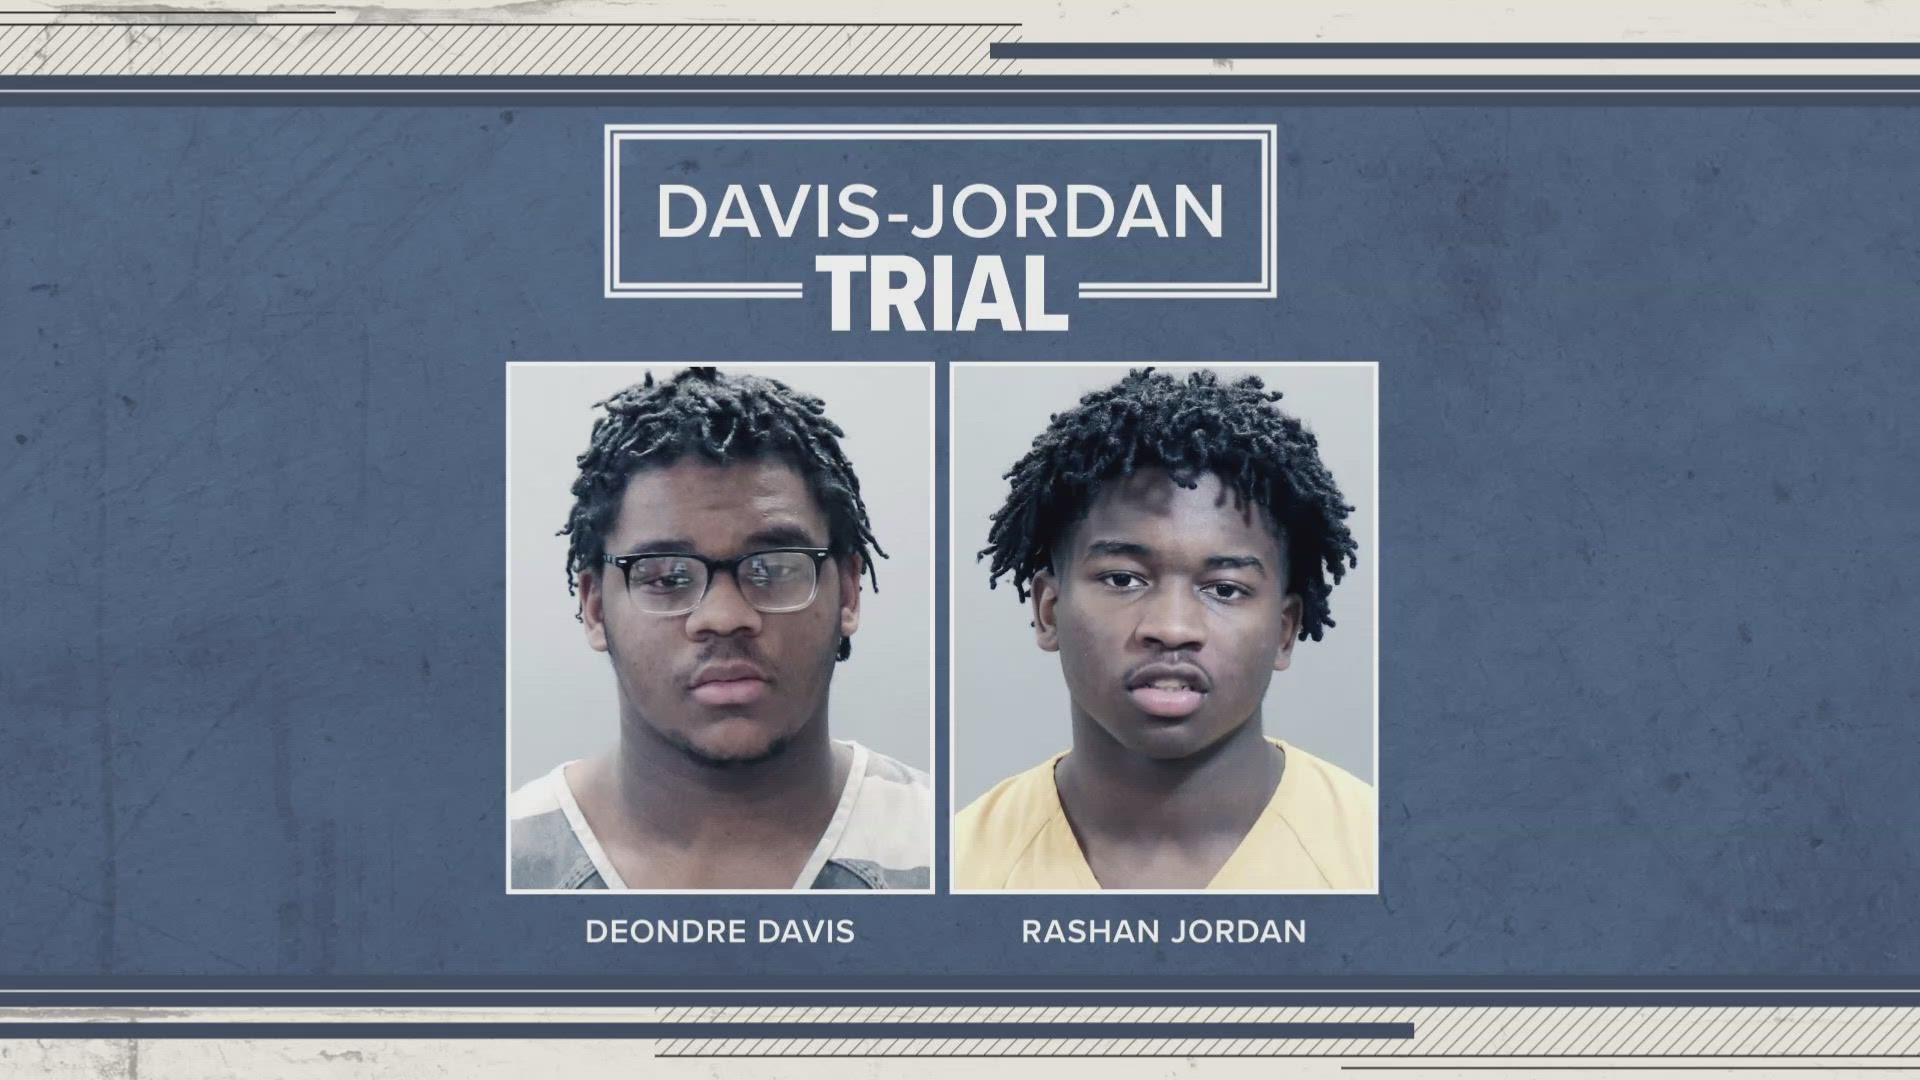 Rashan Jordan and Deondre Davis are expected to face trial on Monday. However, a judge is considering whether to delay it.